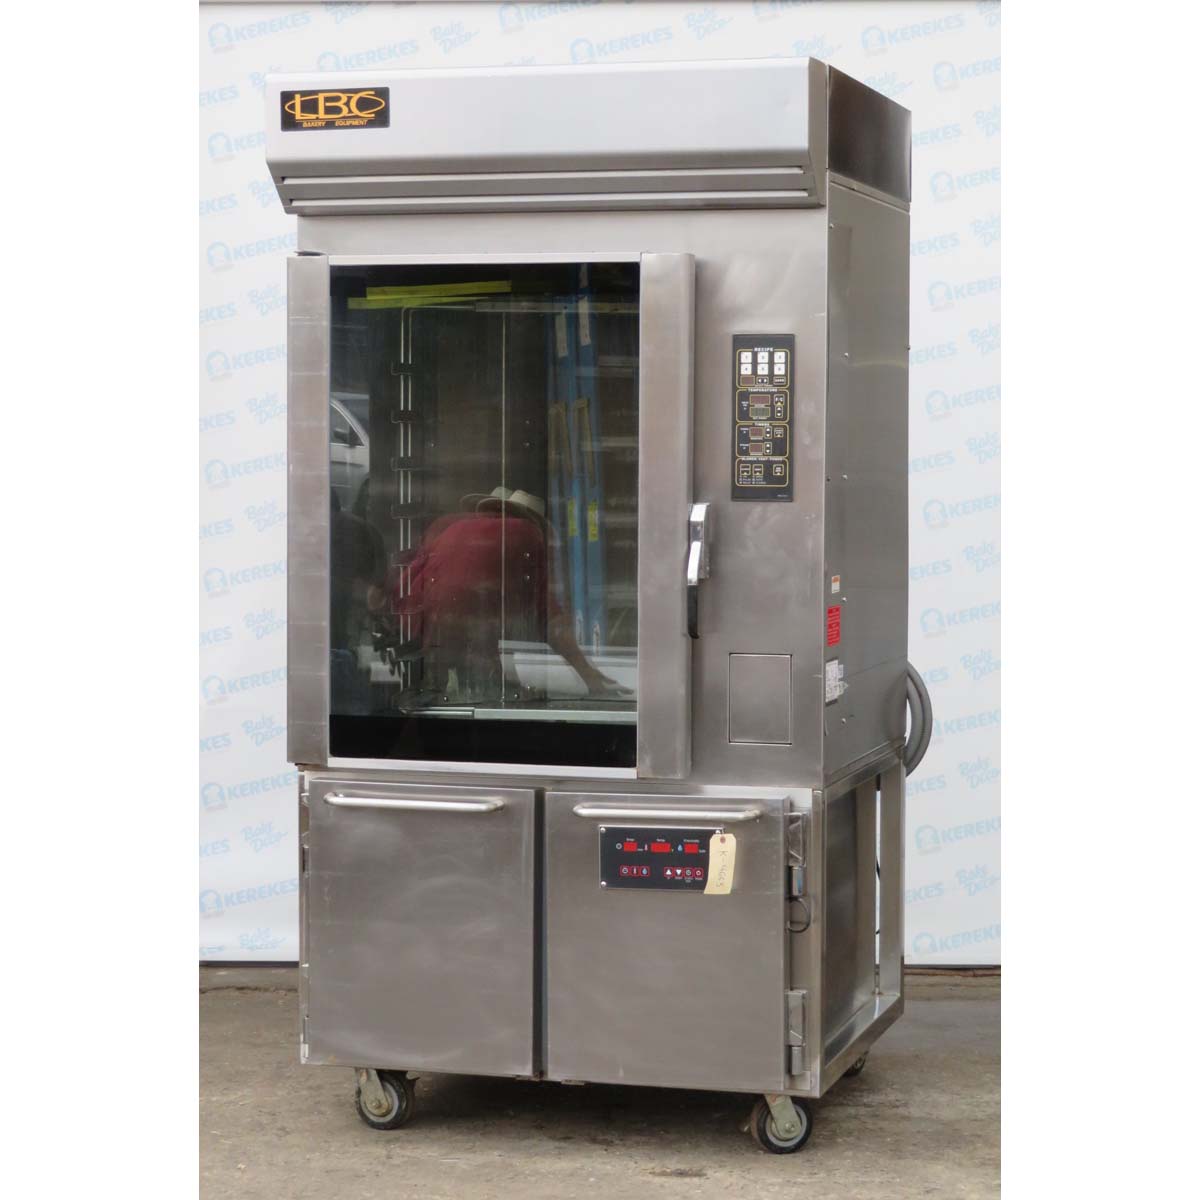 LBC LMO-E8 Electric Mini Rack Oven With Proofer, Used Excellent Condition